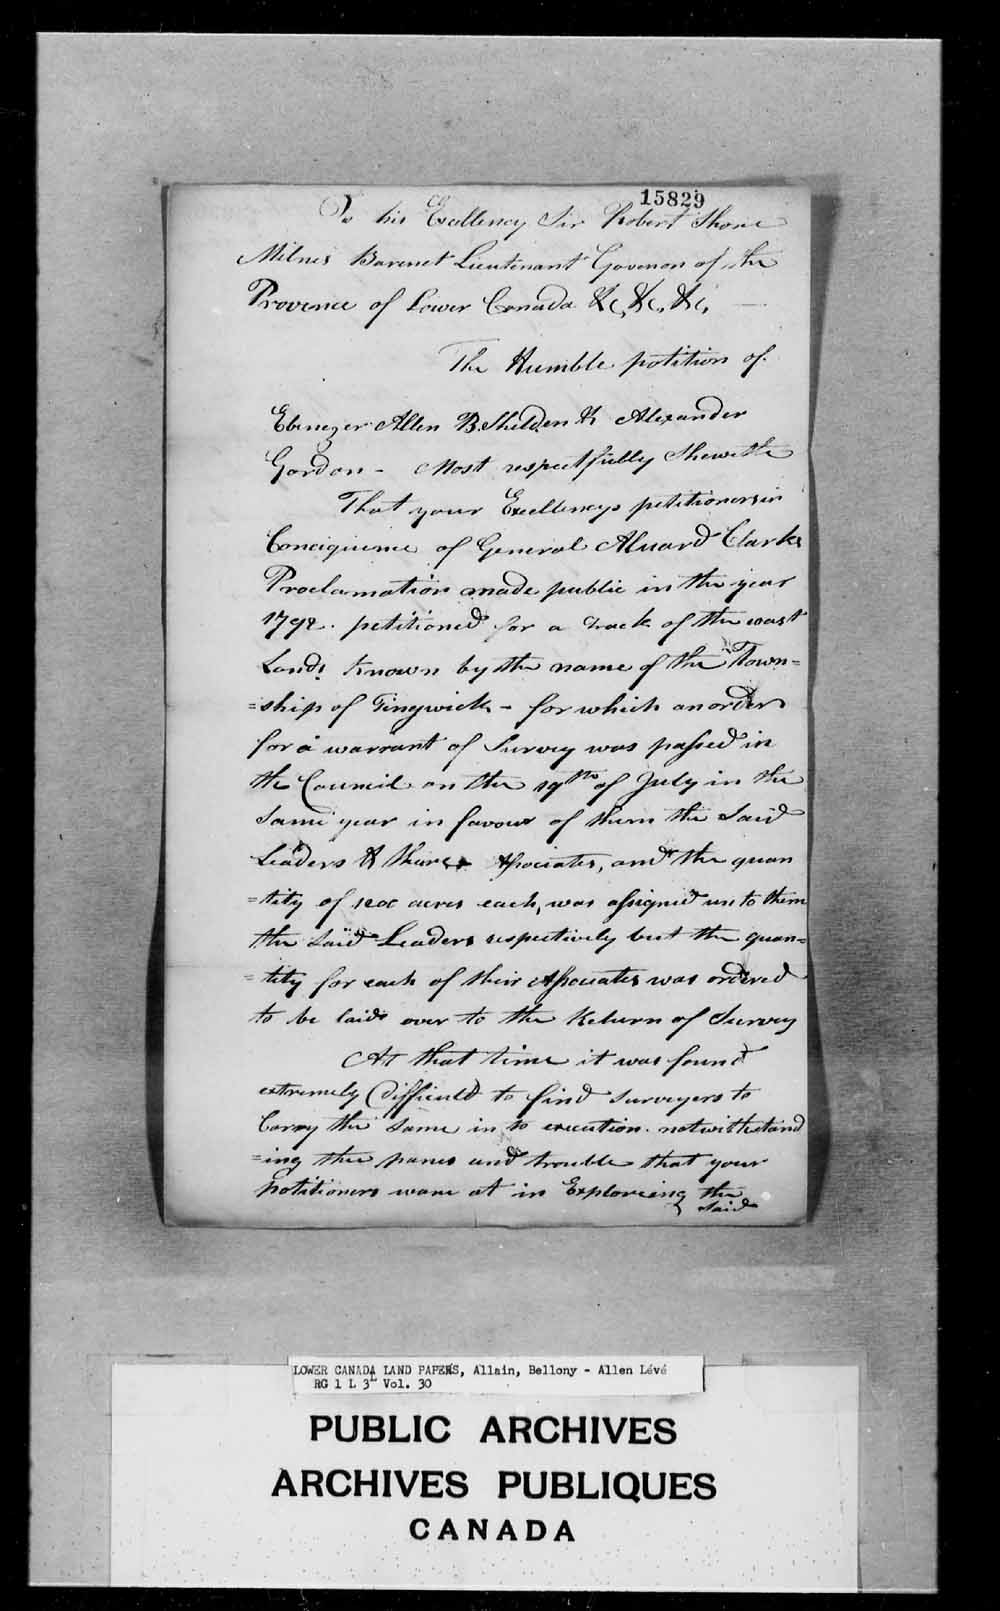 Digitized page of  for Image No.: e003702659